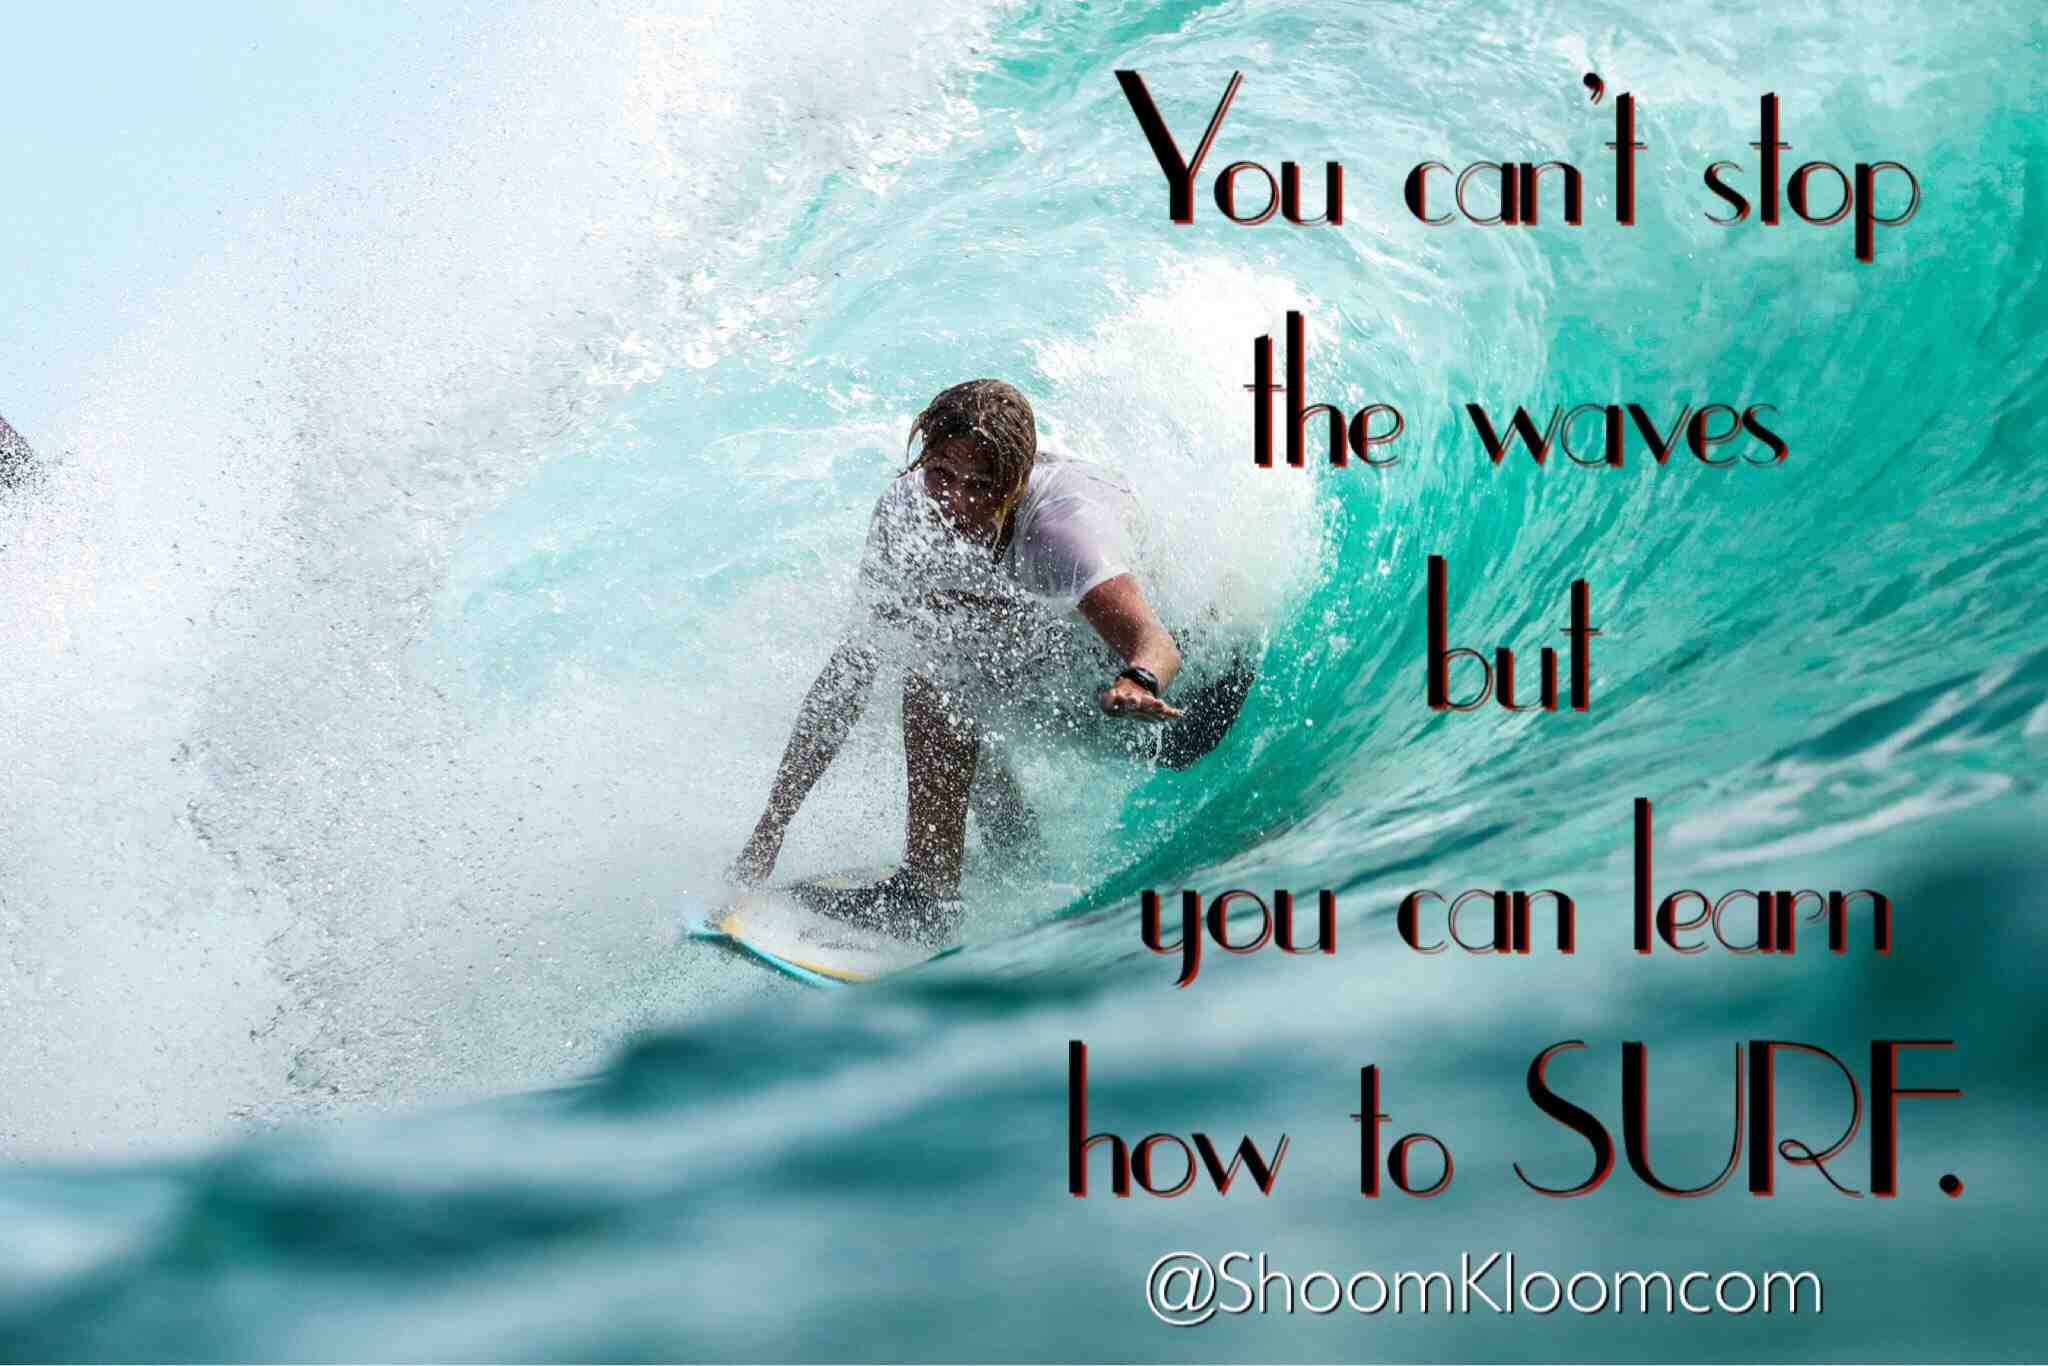 How do you break a wave?